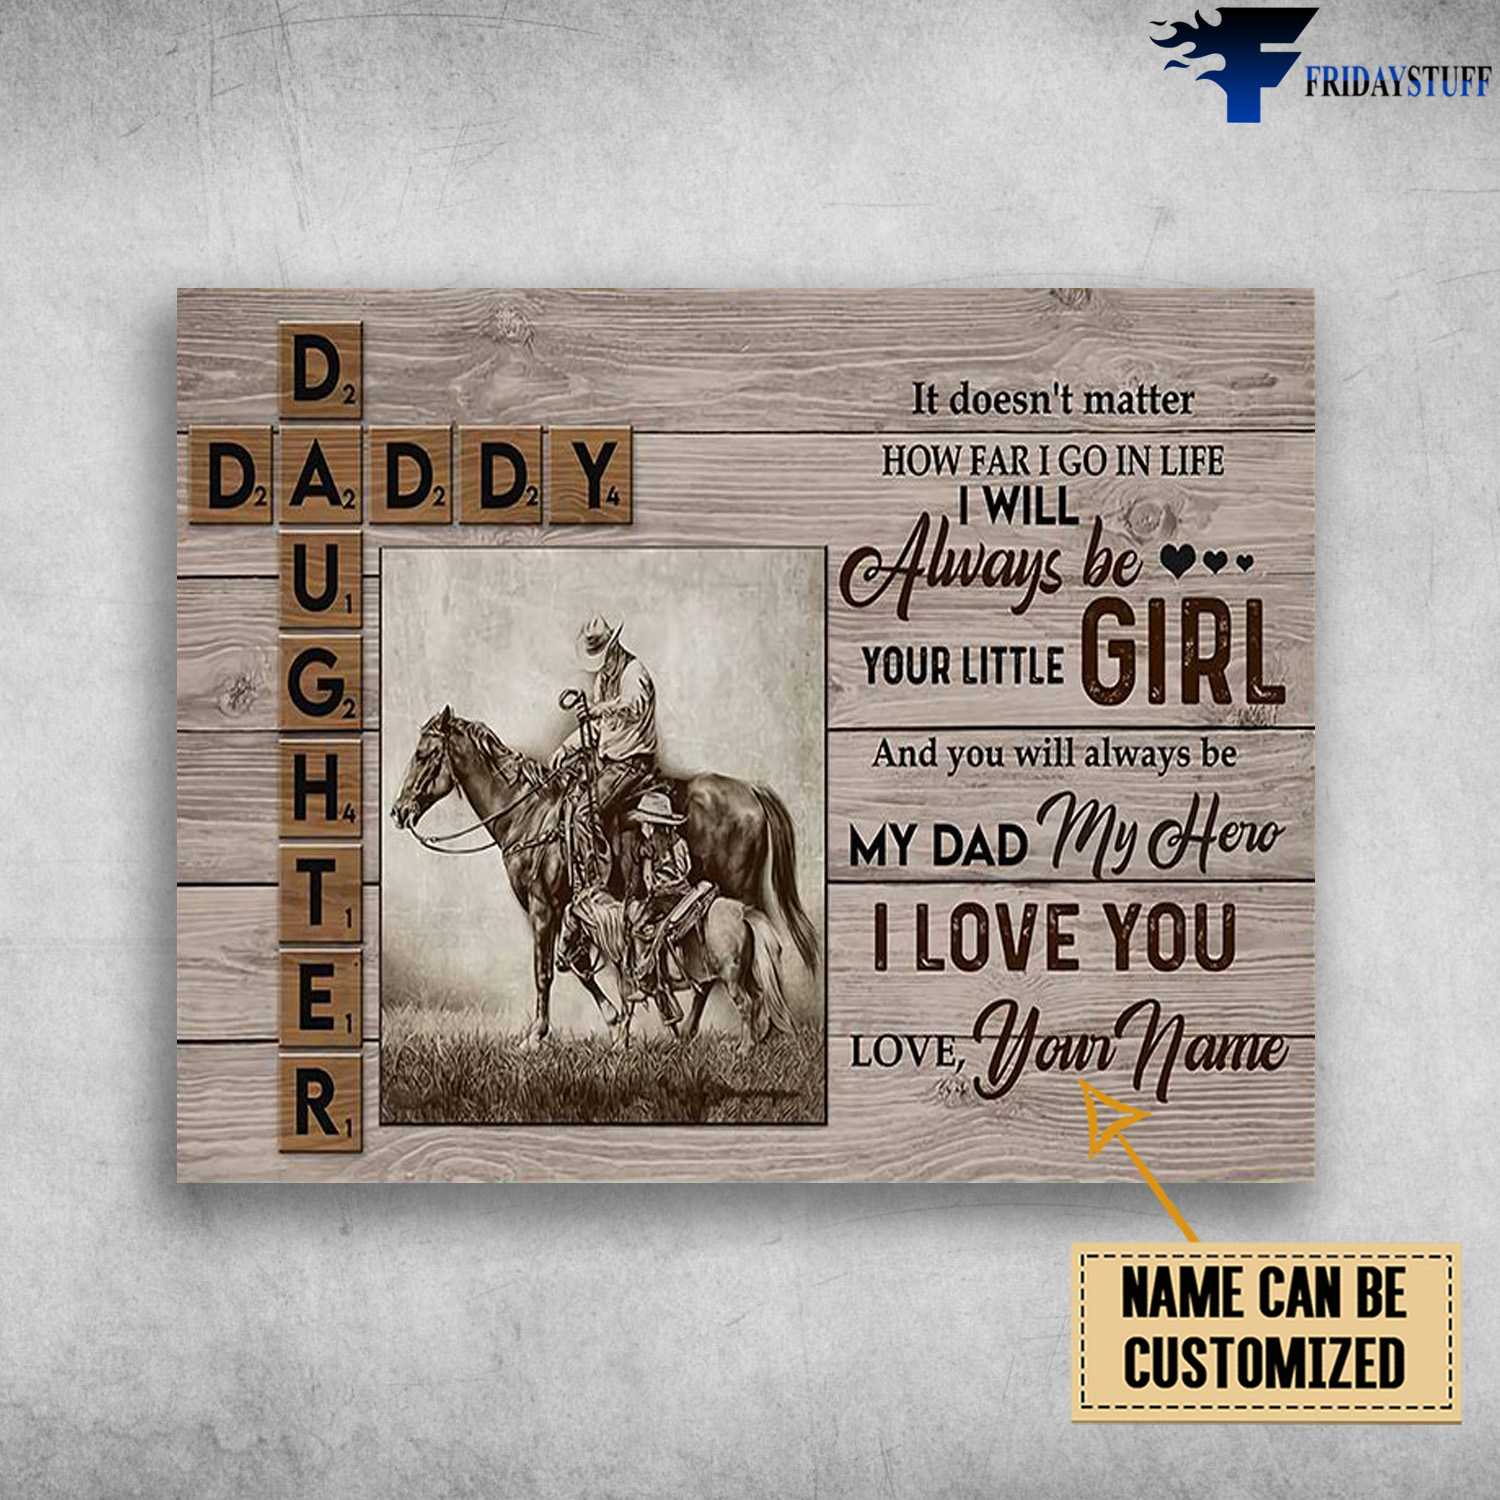 Dad And Daughter, Horse Riding, It Doesn't Matter, How Far I Go In Life, I Will Always Be Girl, And You Will Always Be Your Little Girl, And You Will Always Be My Dad, My Hero